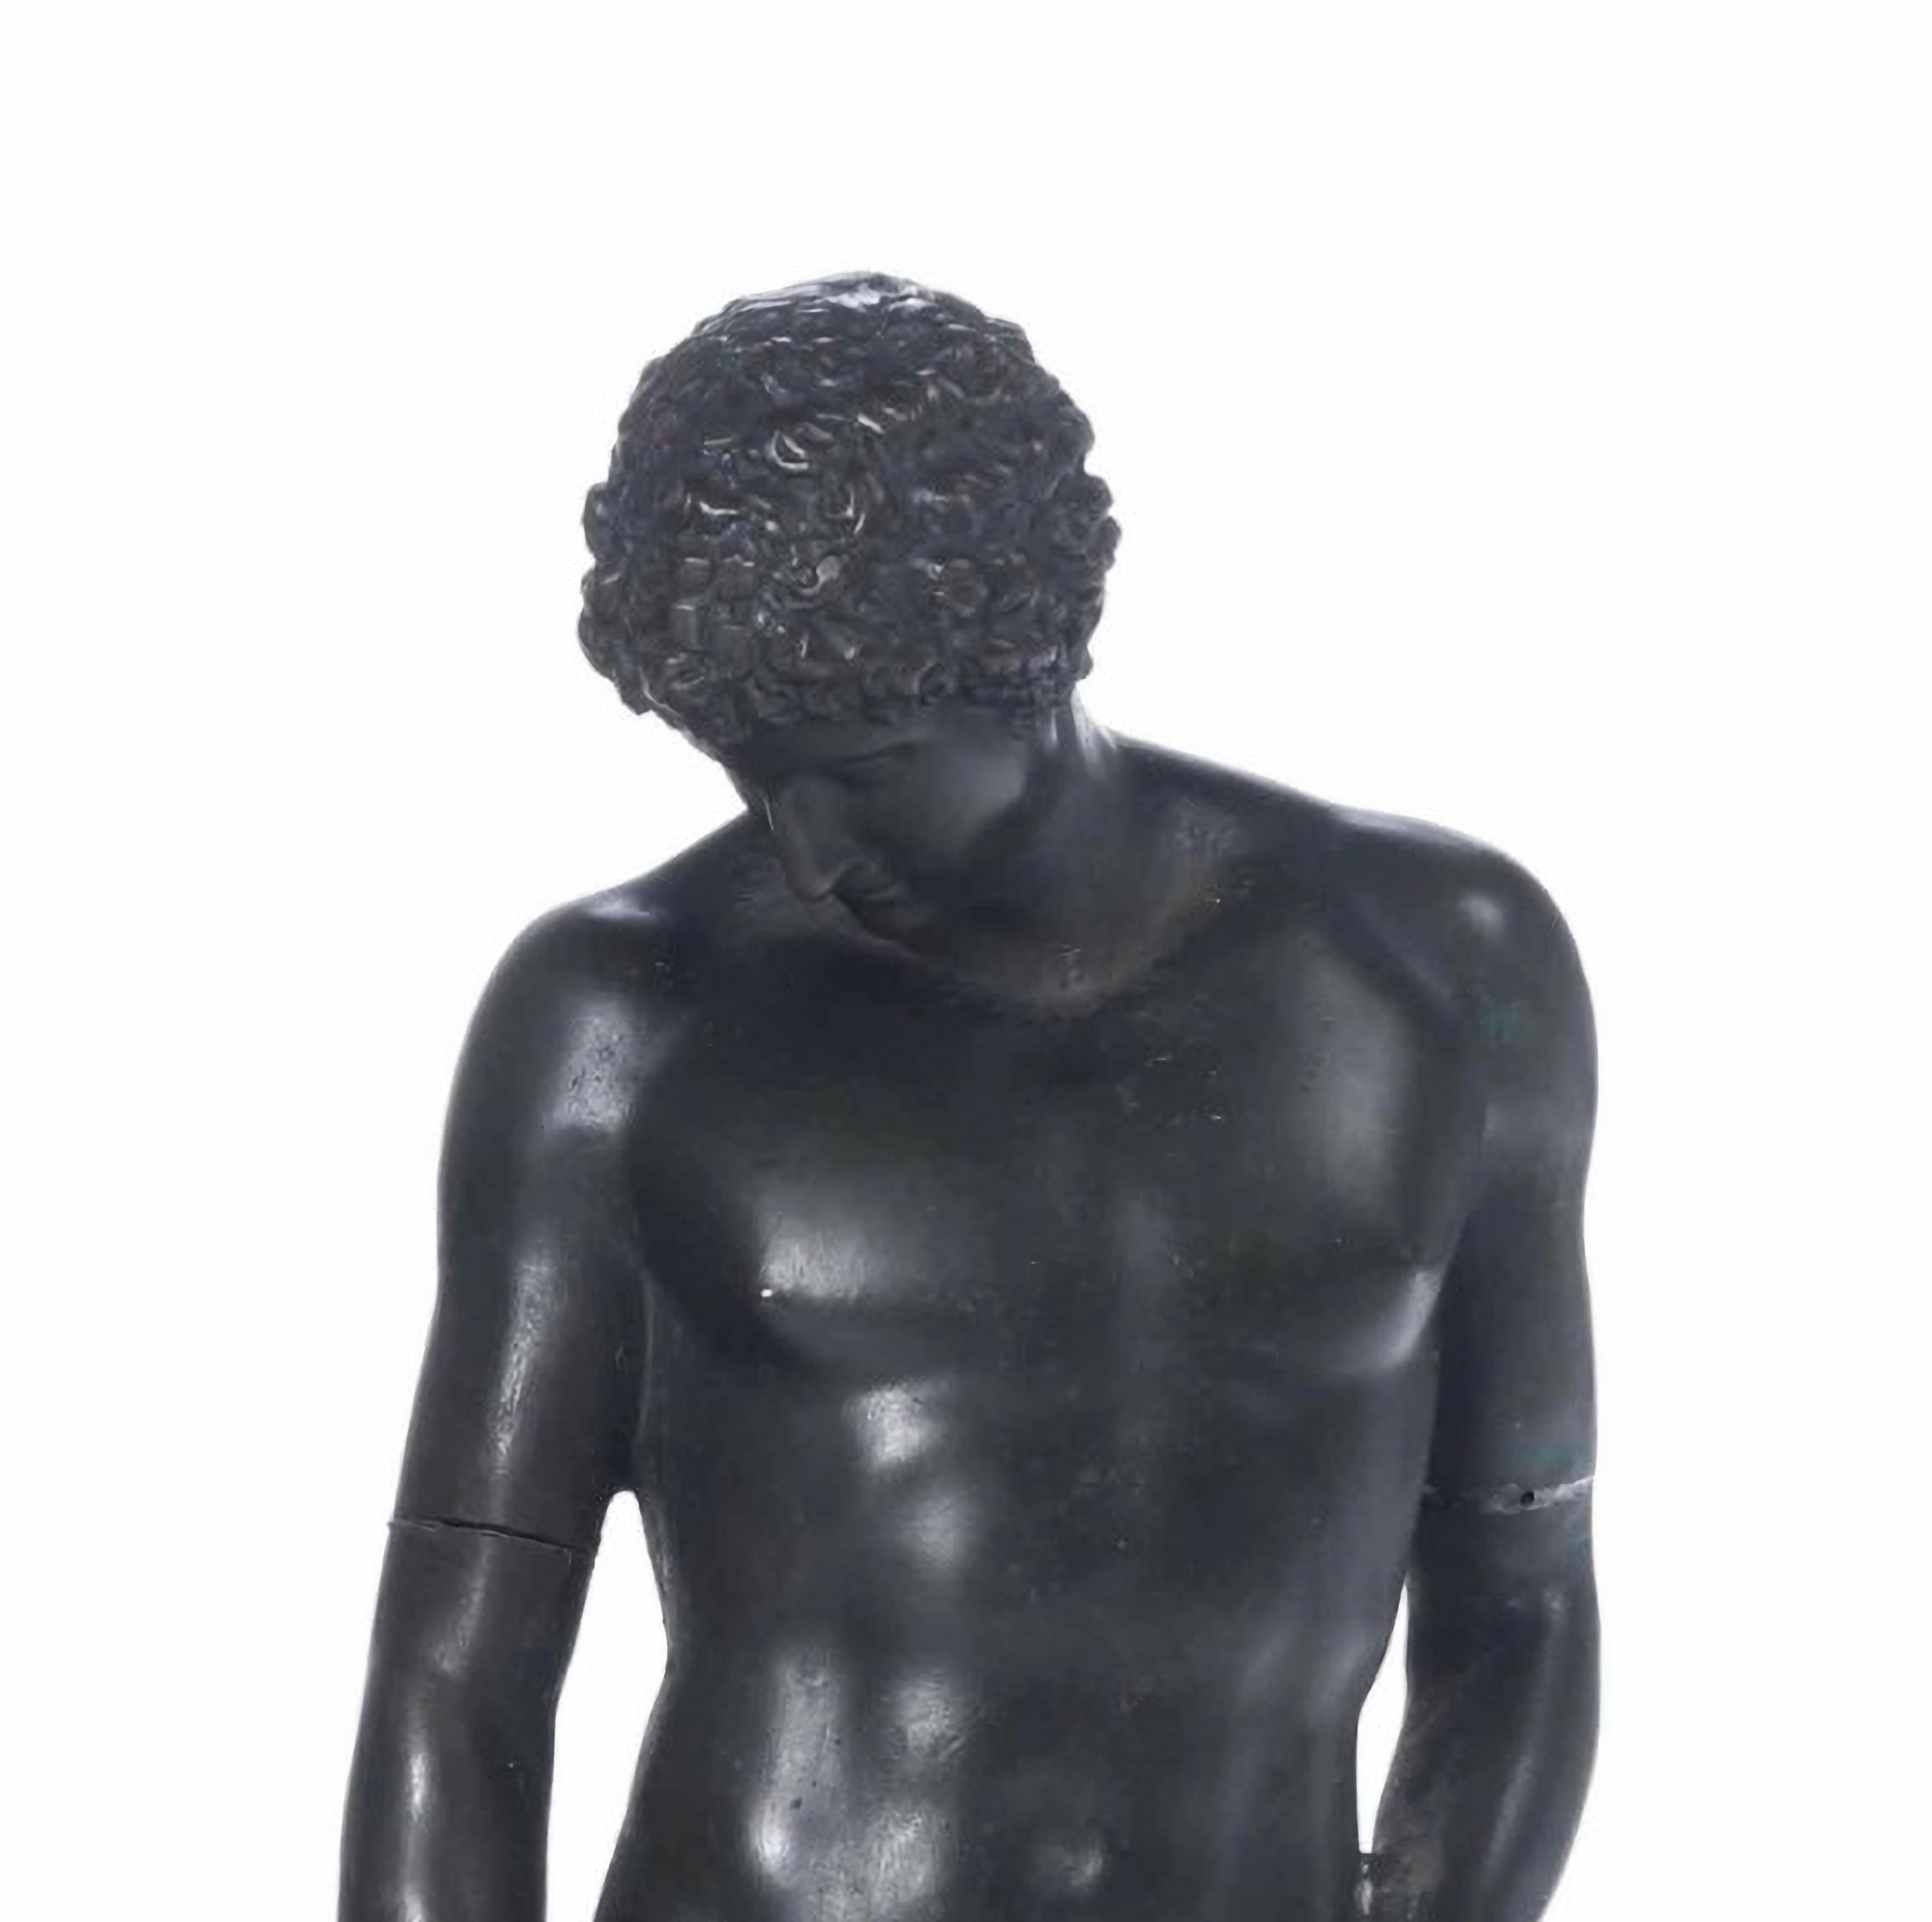 Venus of the Medici and Antinous Capitoline.
Cast and patinated Italian bronze 19th century
Measures: Venus height 32.5 cm; Antinous height 31 cm
Very good condition.